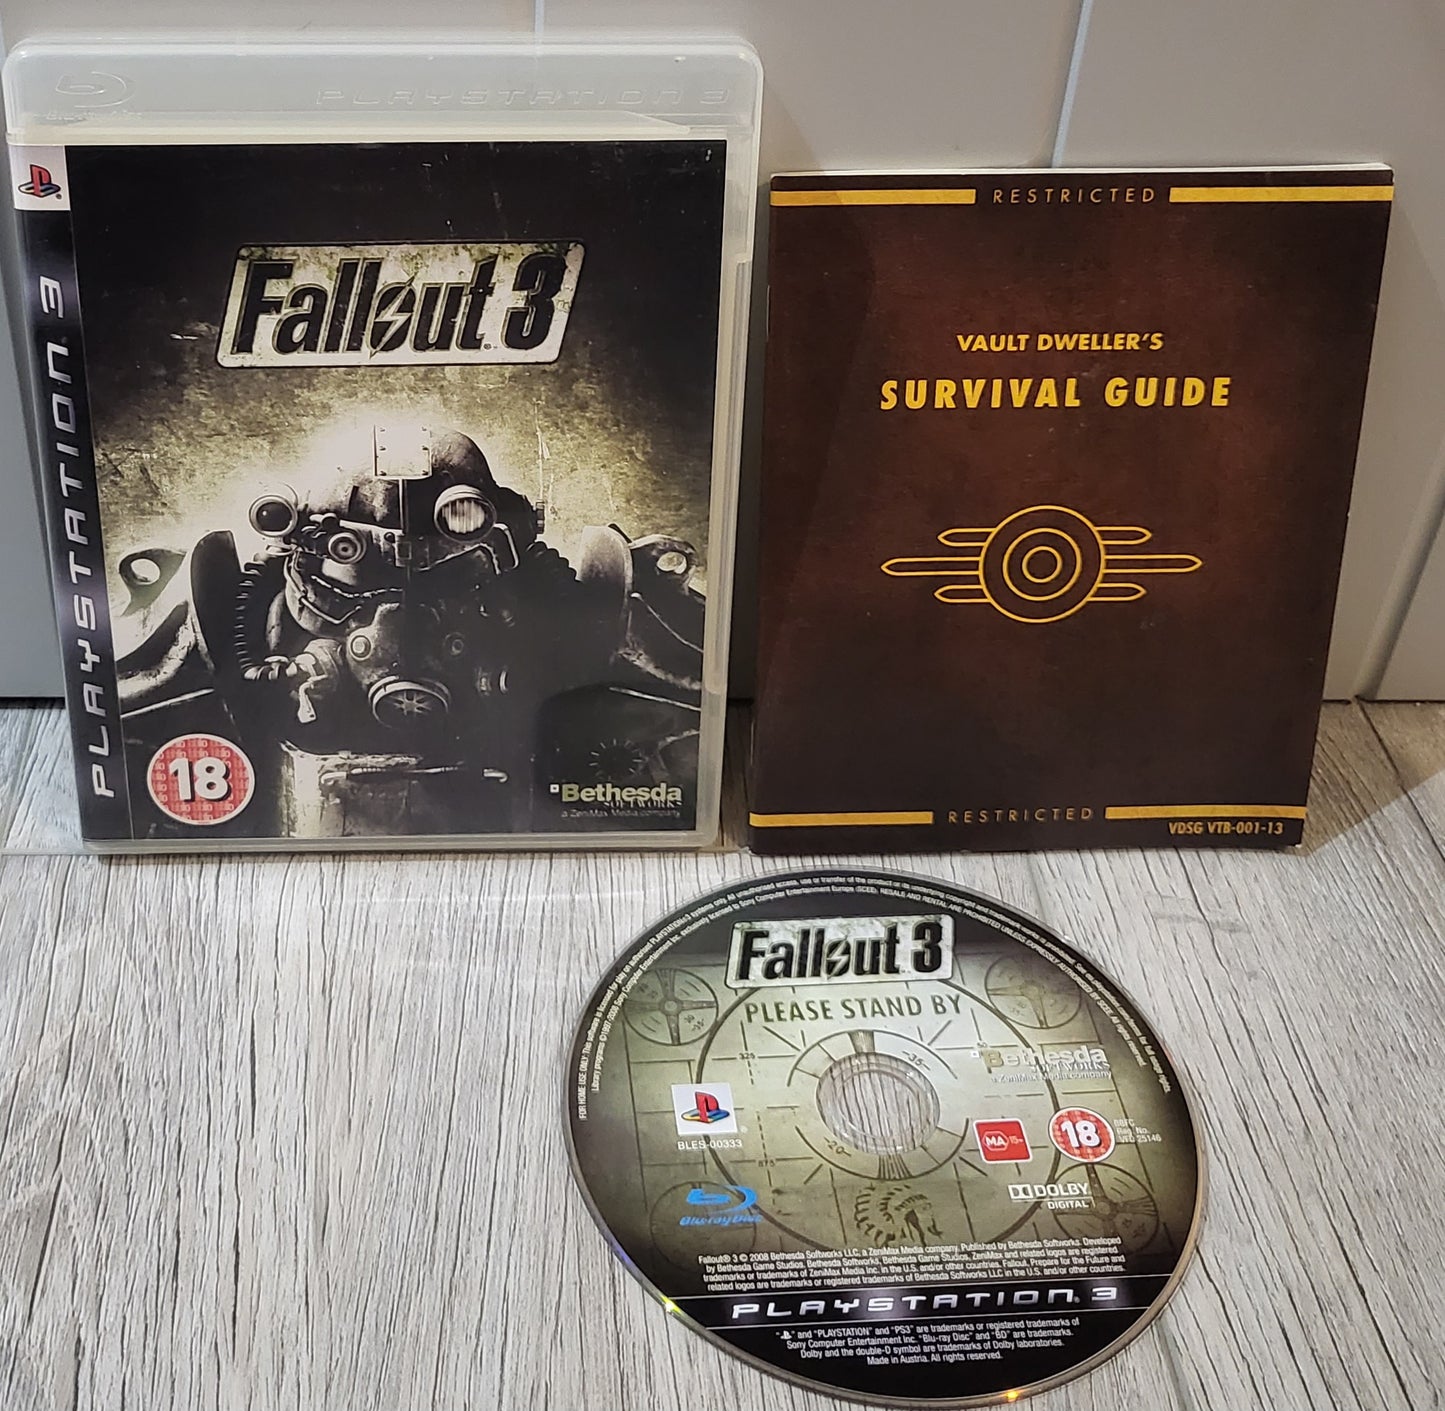 Fallout 3 Sony Playstation 3 (PS3) Game